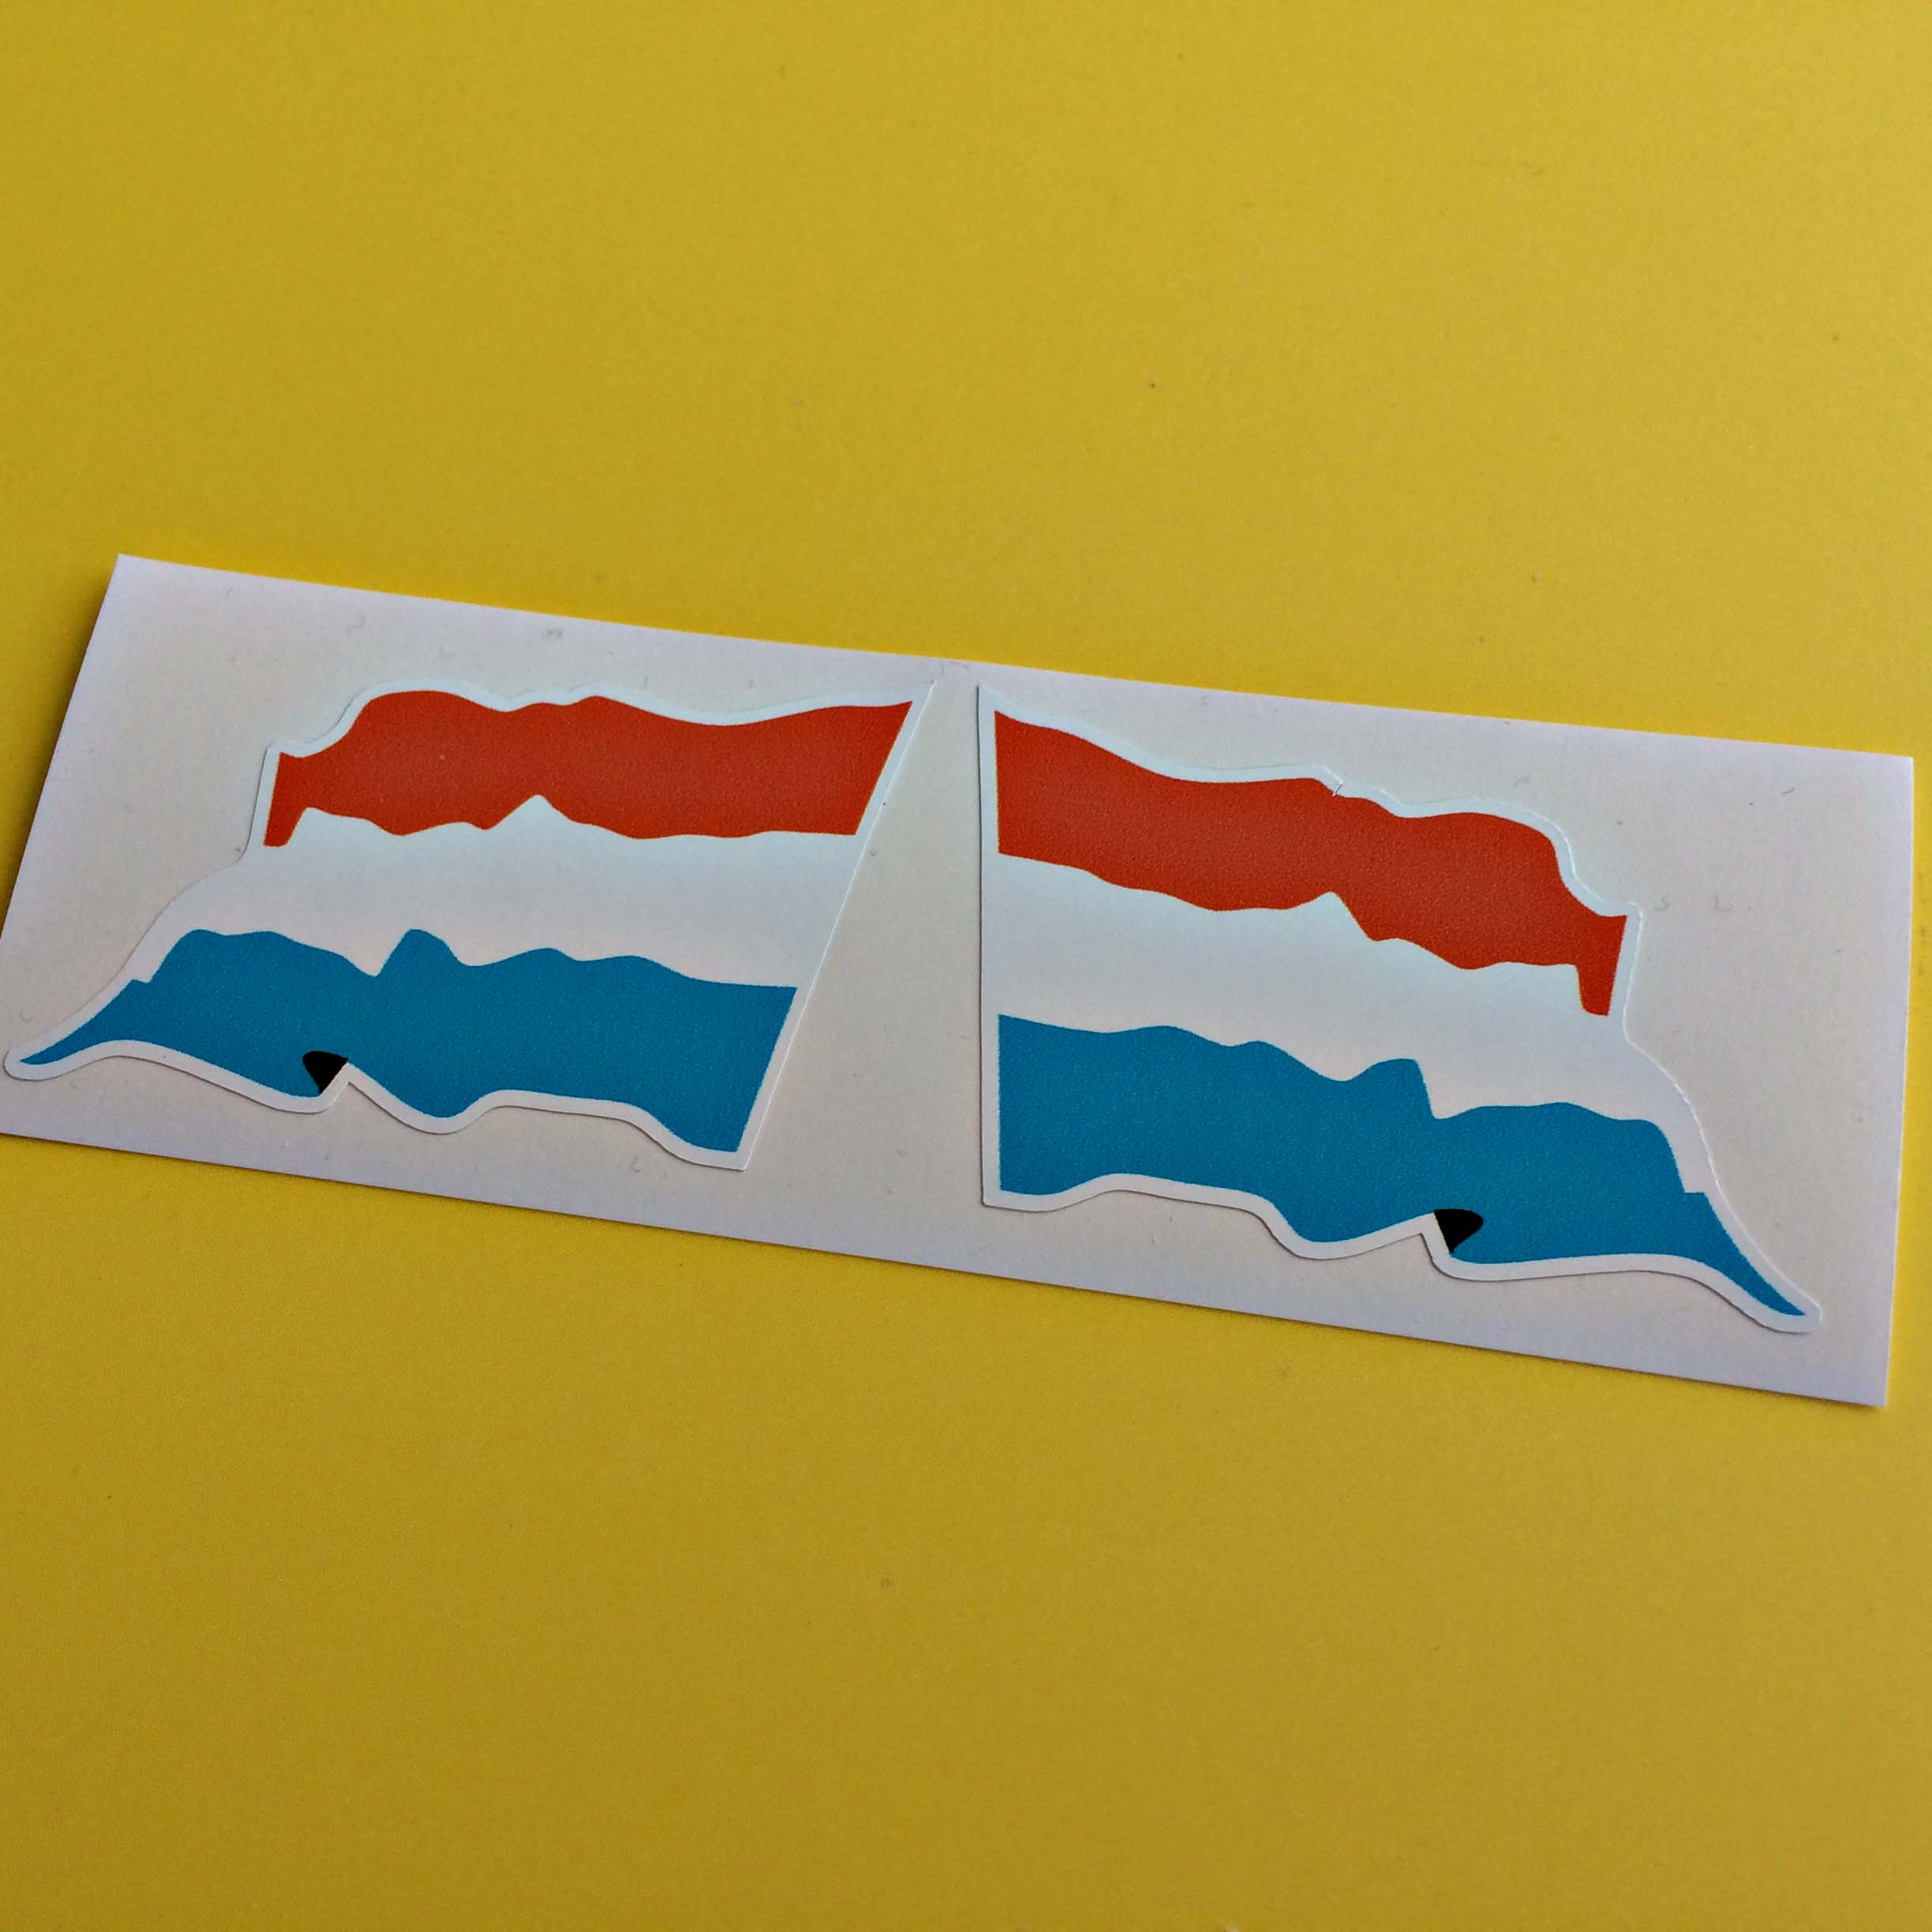 NETHERLANDS WAVEY FLAG STICKER. The flag is a horizontal tricolour of red, white and blue.